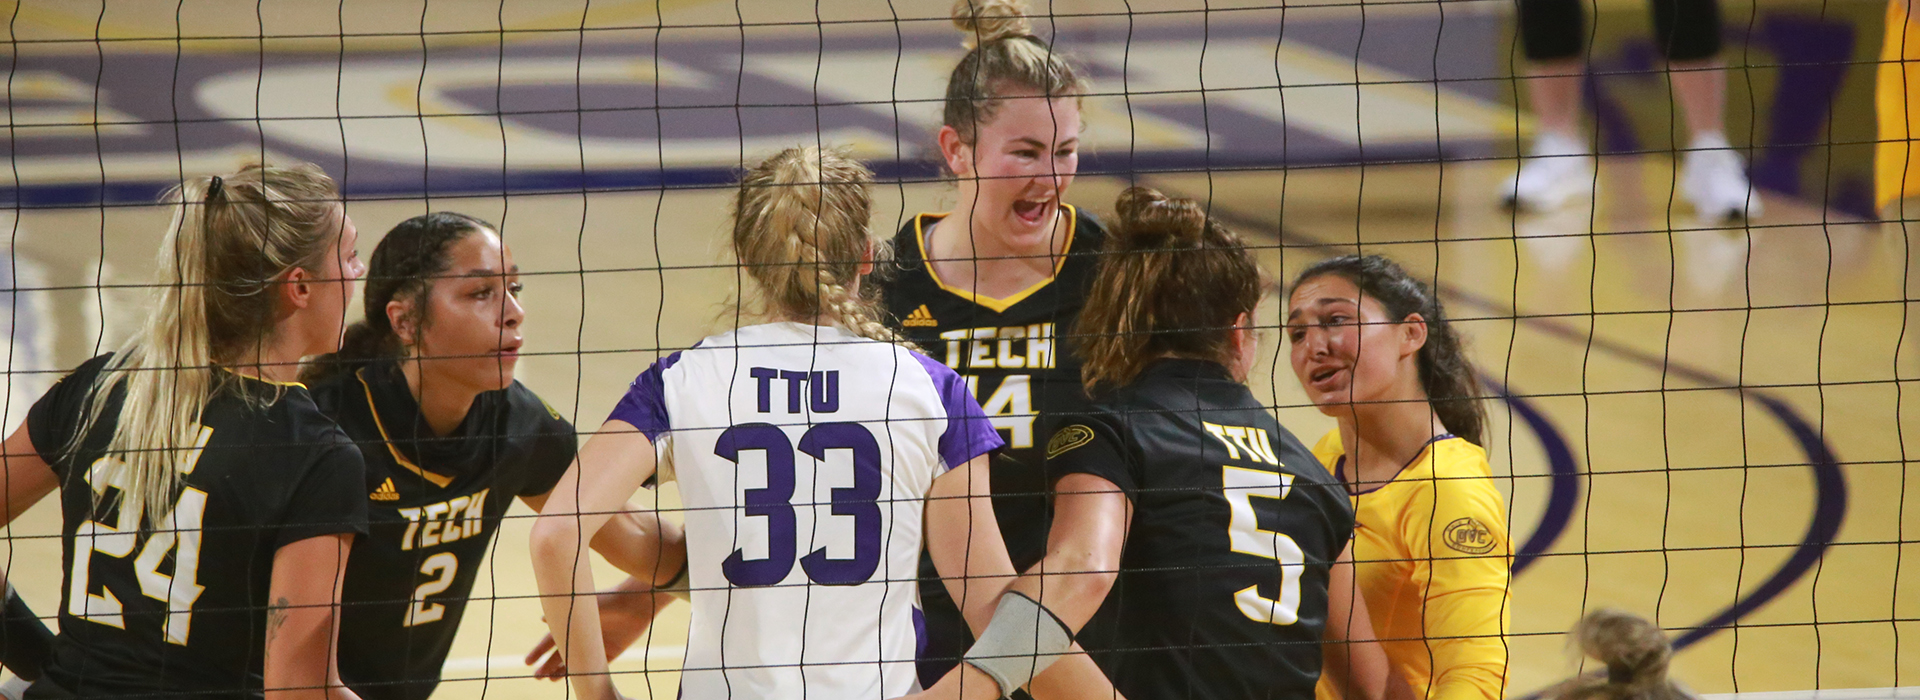 Golden Eagle volleyball team to open 2020-21 season at Austin Peay Sunday and Monday